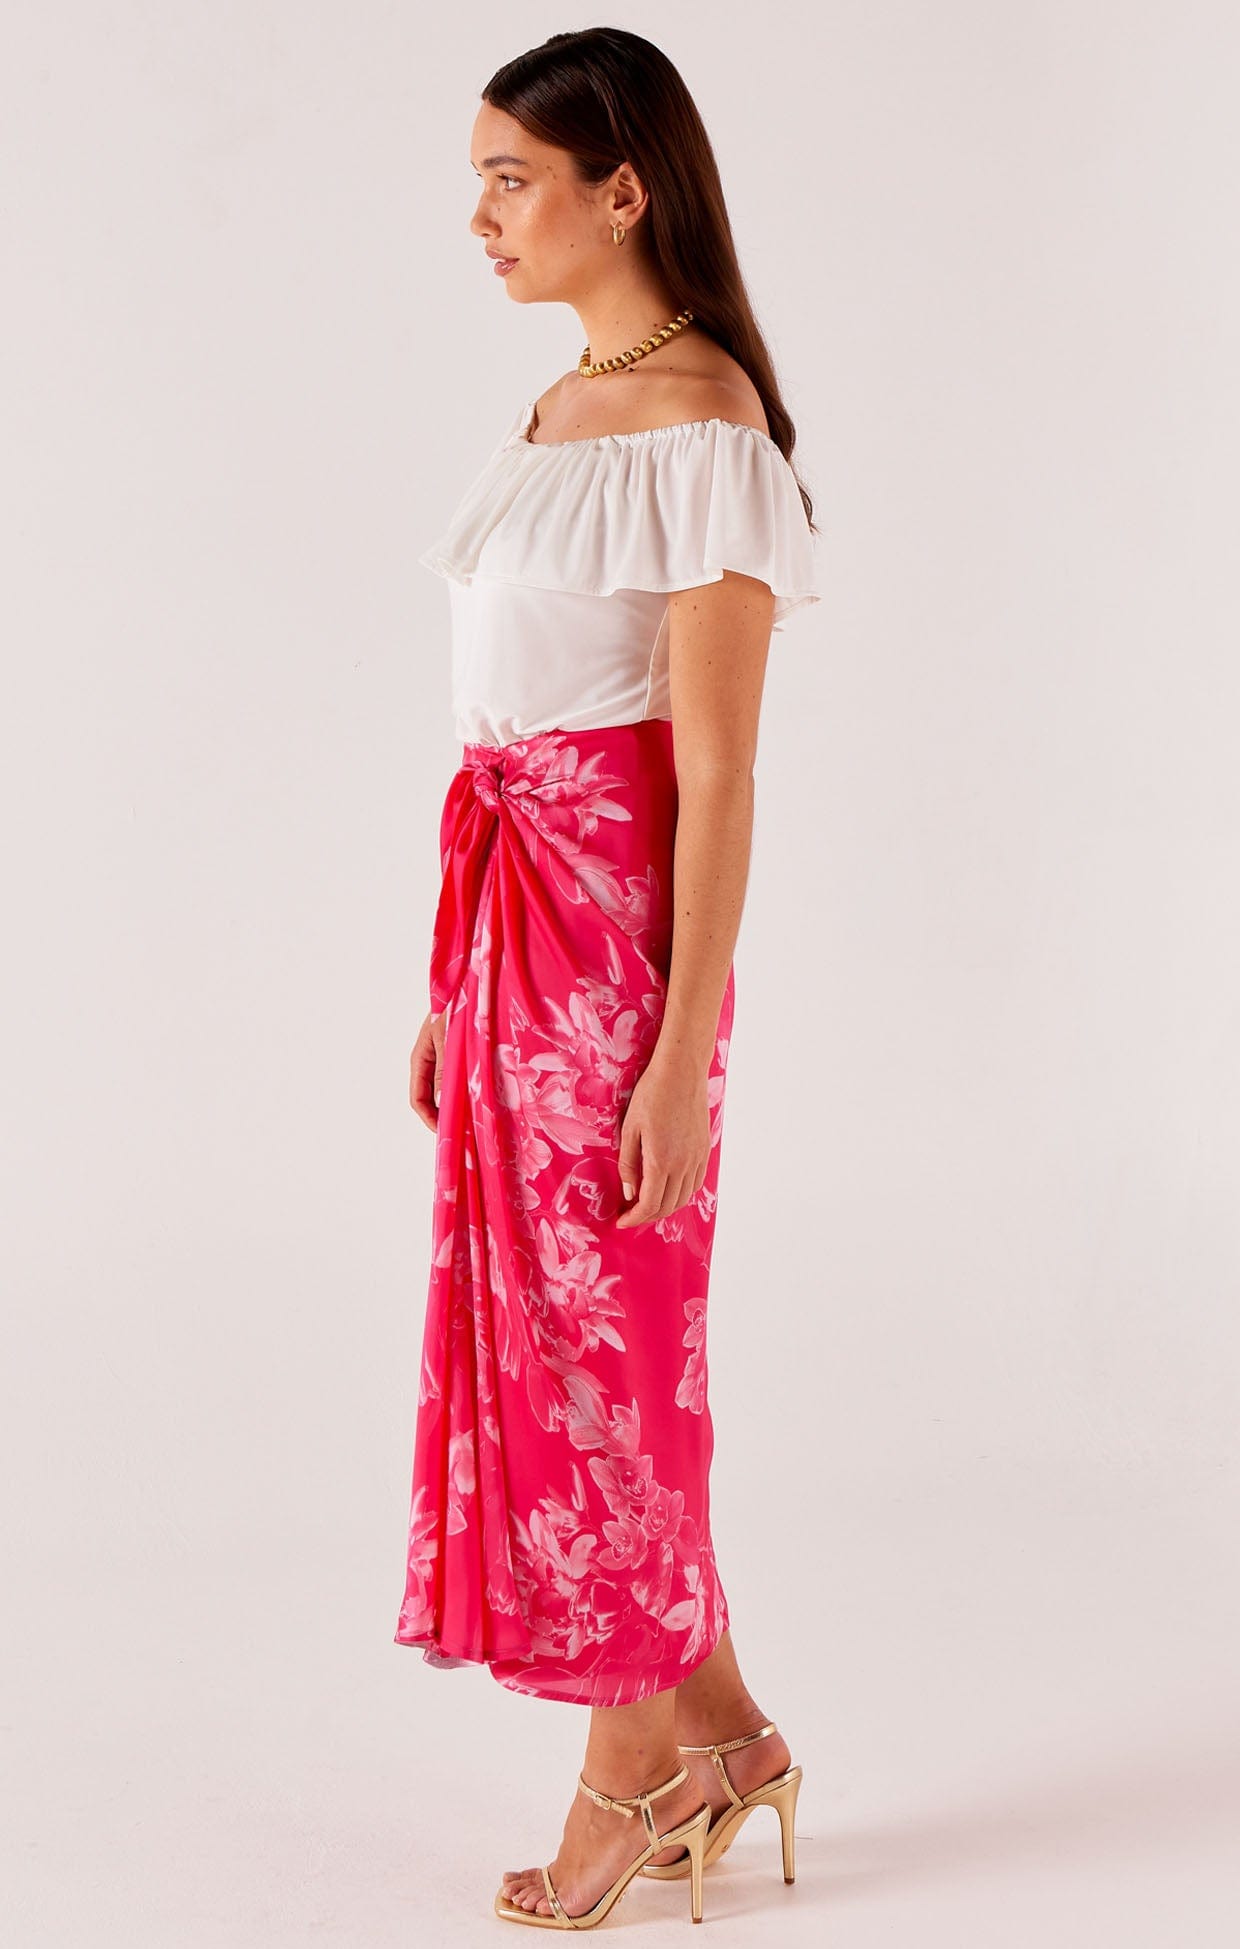 Skirts Events PINK ORCHID SKIRT IN HOT PINK FLORAL